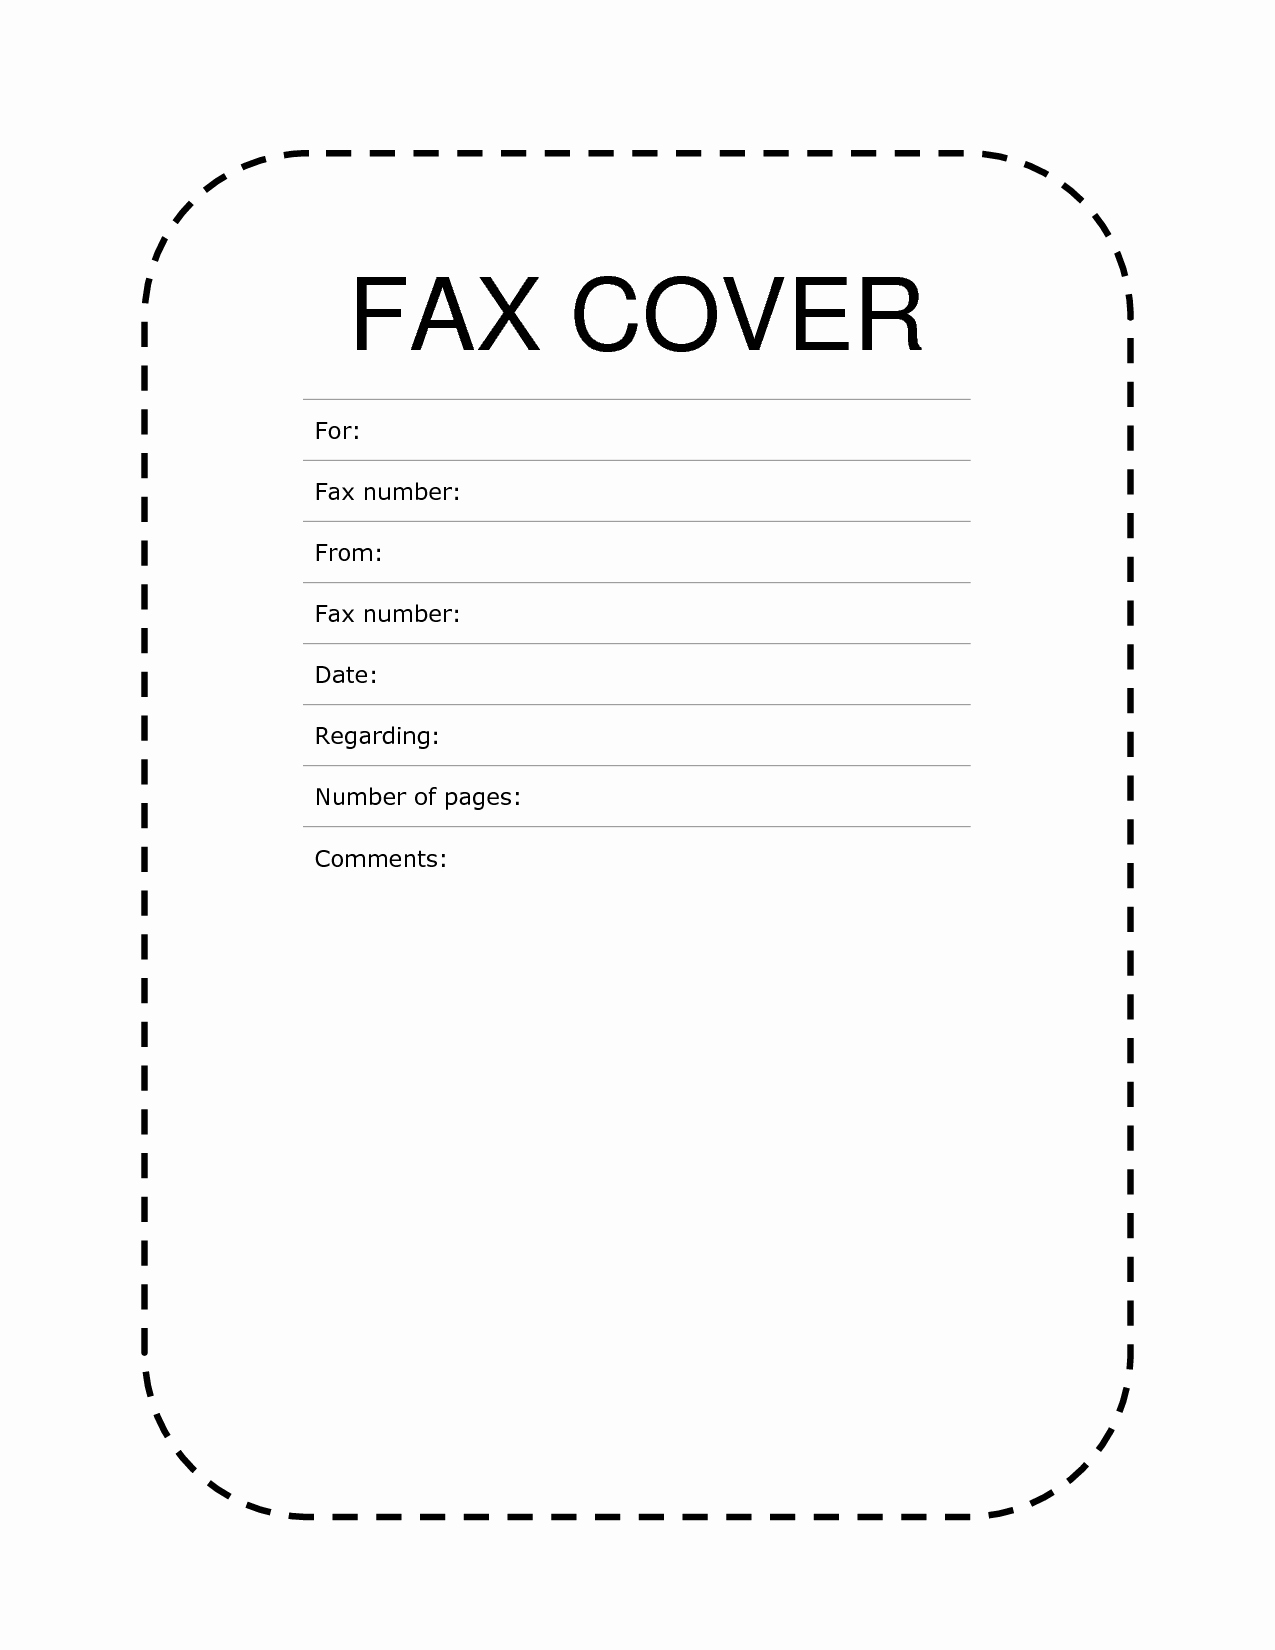 Word Fax Cover Sheet Awesome [free] Fax Cover Sheet Template